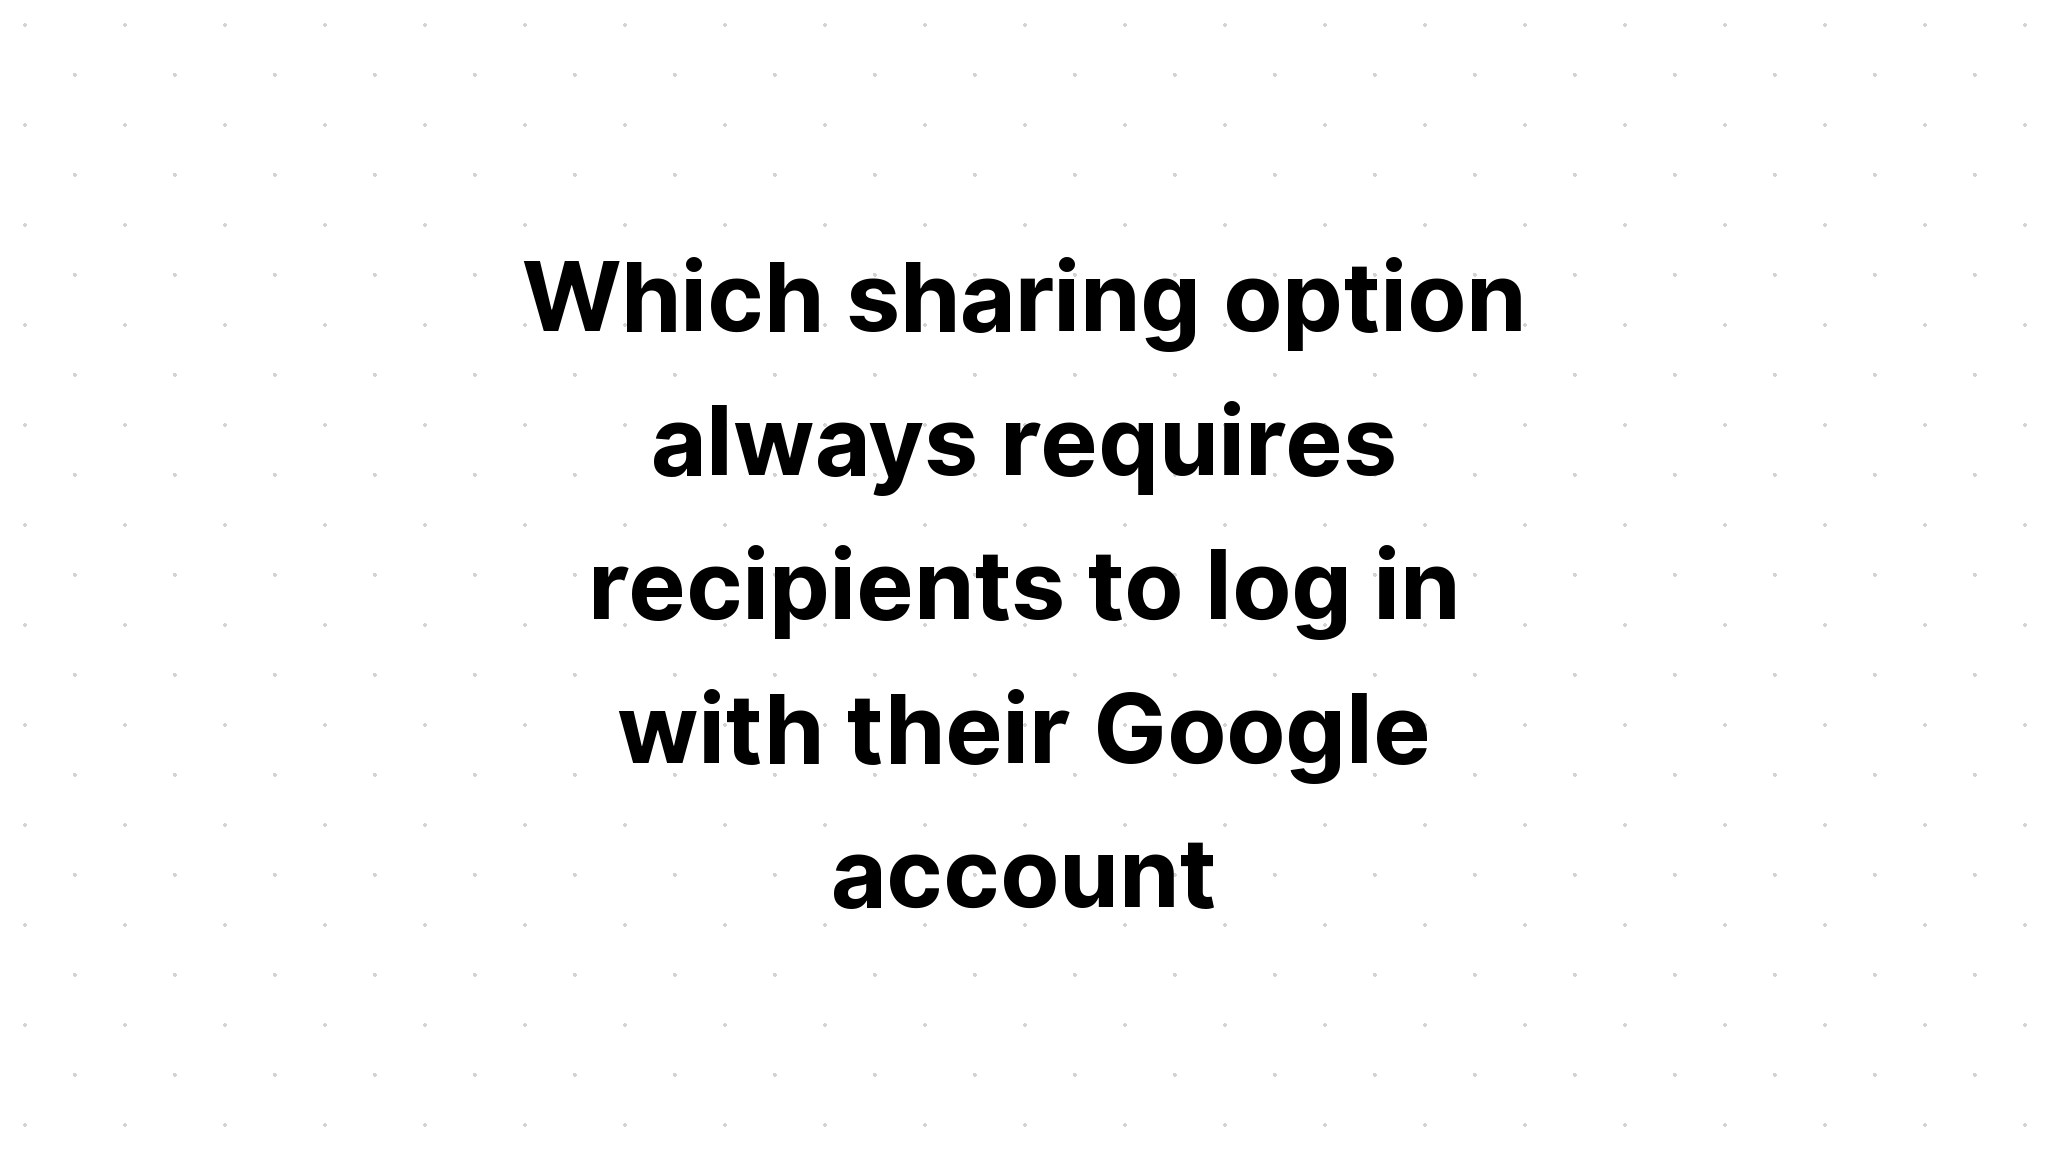 which-sharing-option-always-requires-recipients-to-log-in-with-their